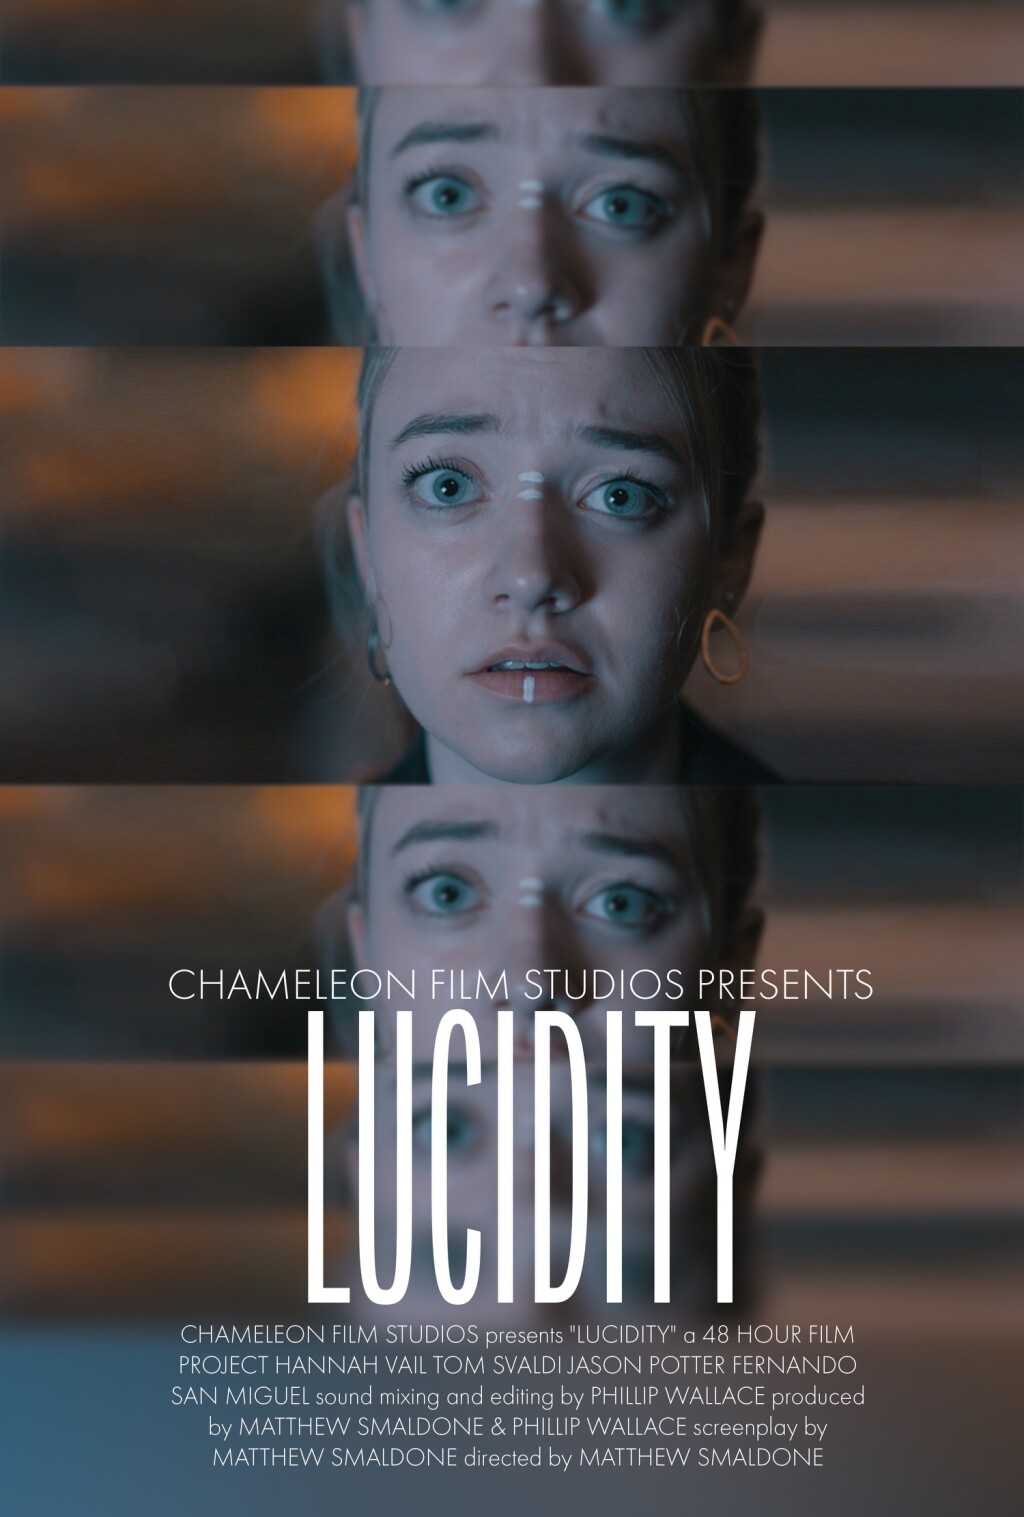 Filmposter for Lucidity